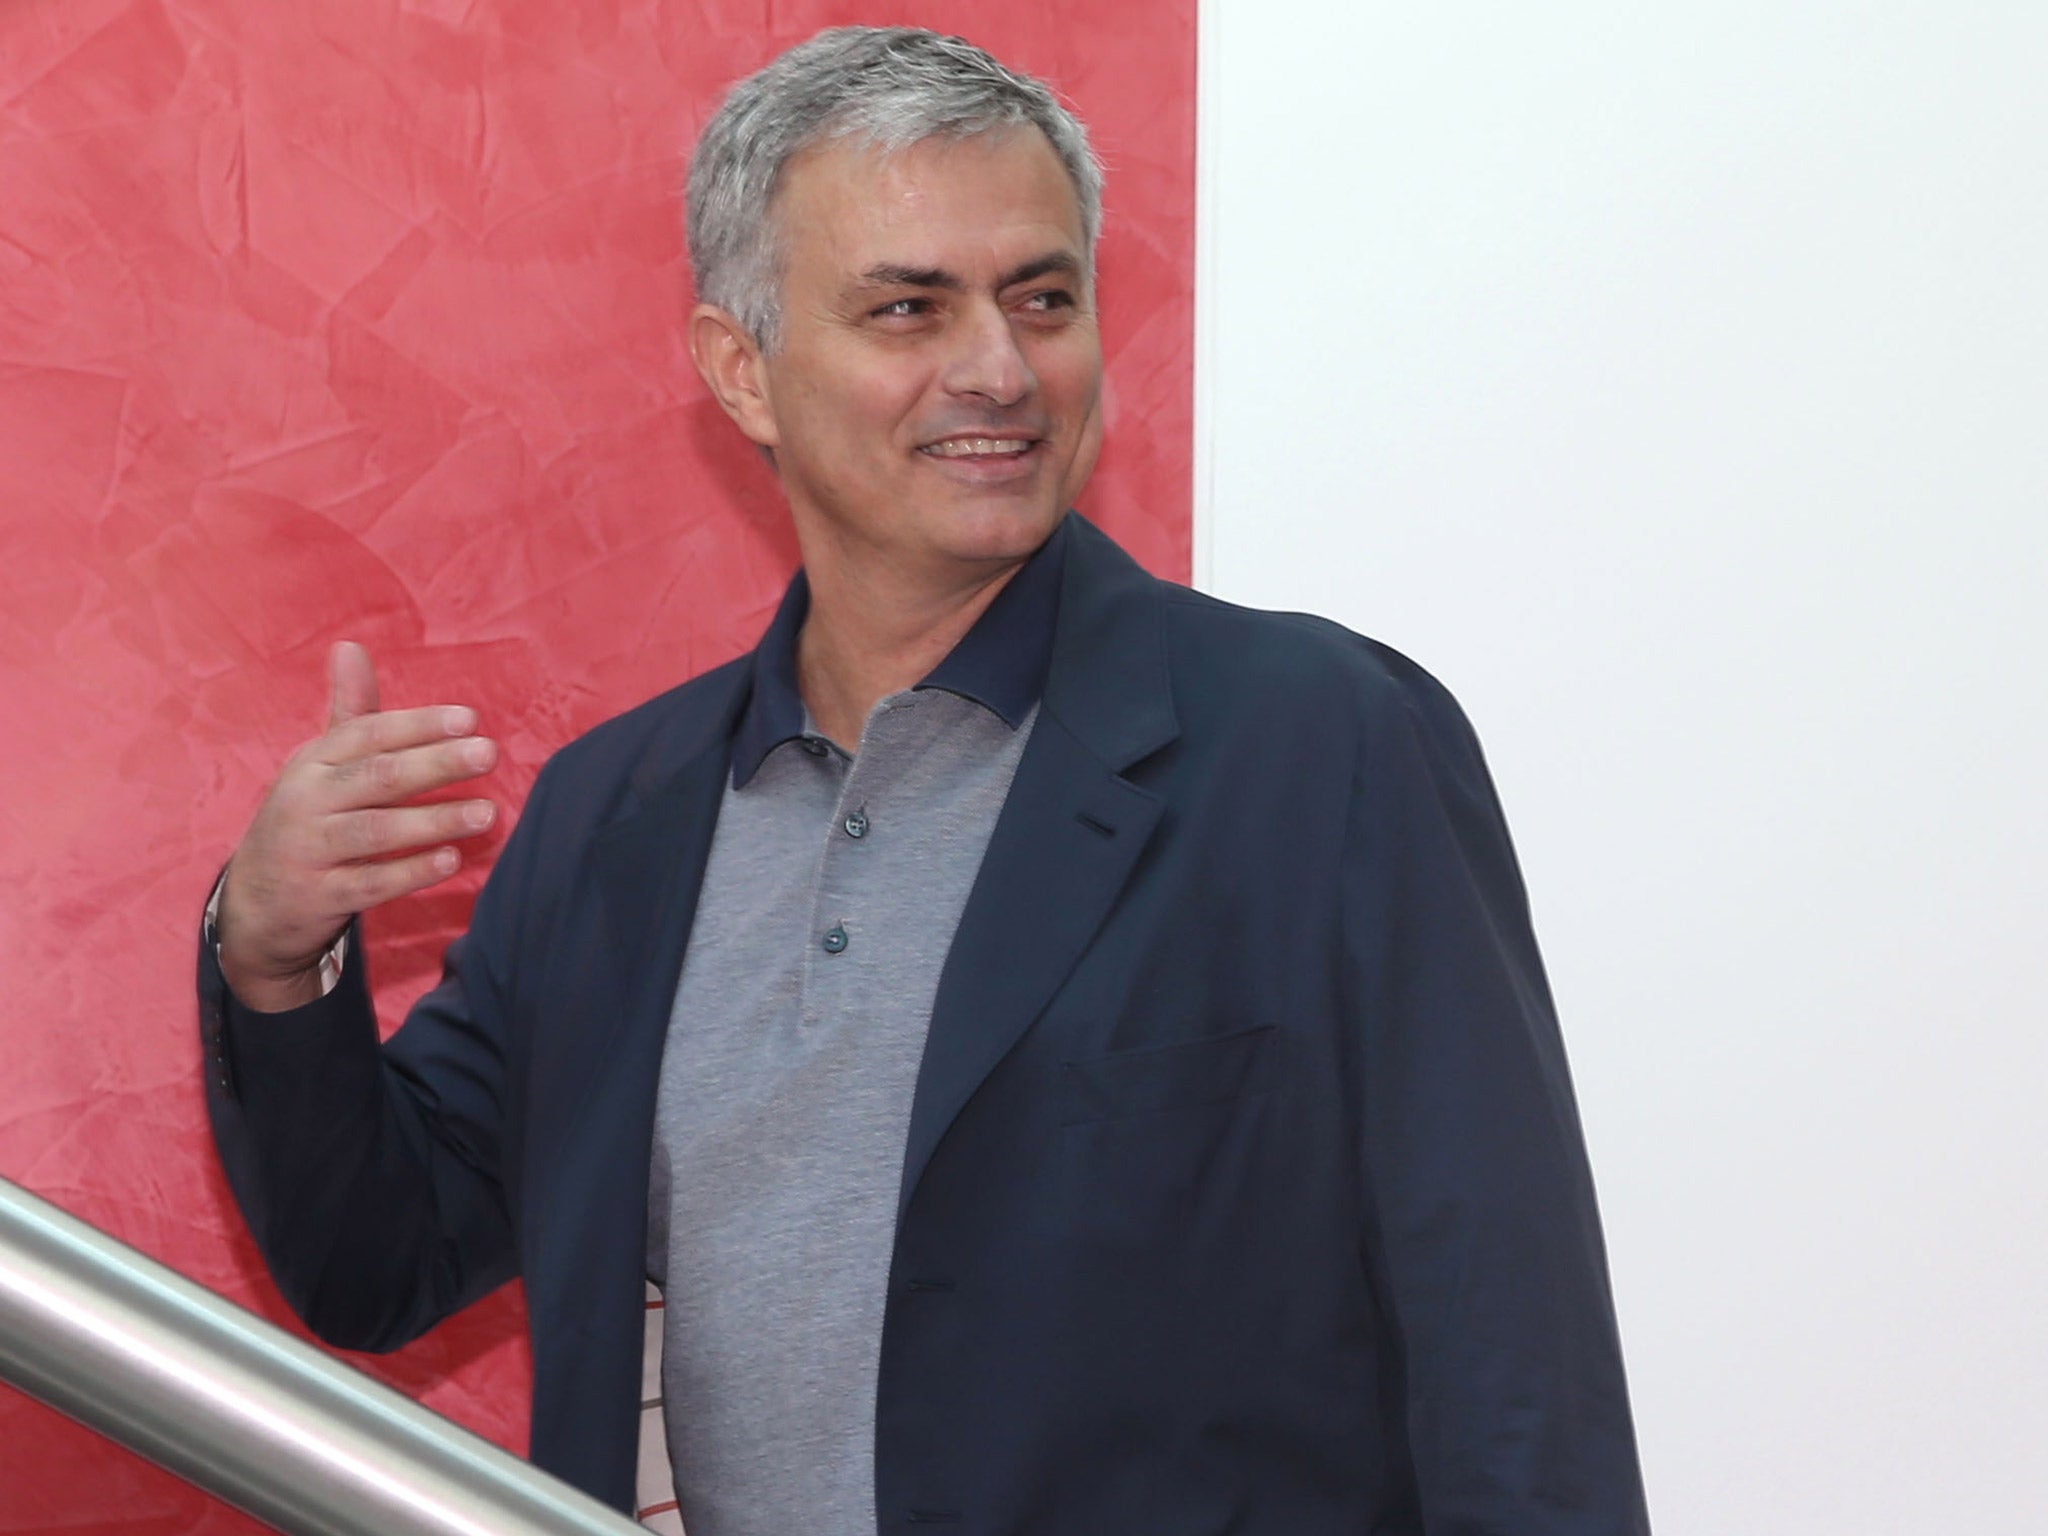 Jose Mourinho will bring box office and a lot more besides to United